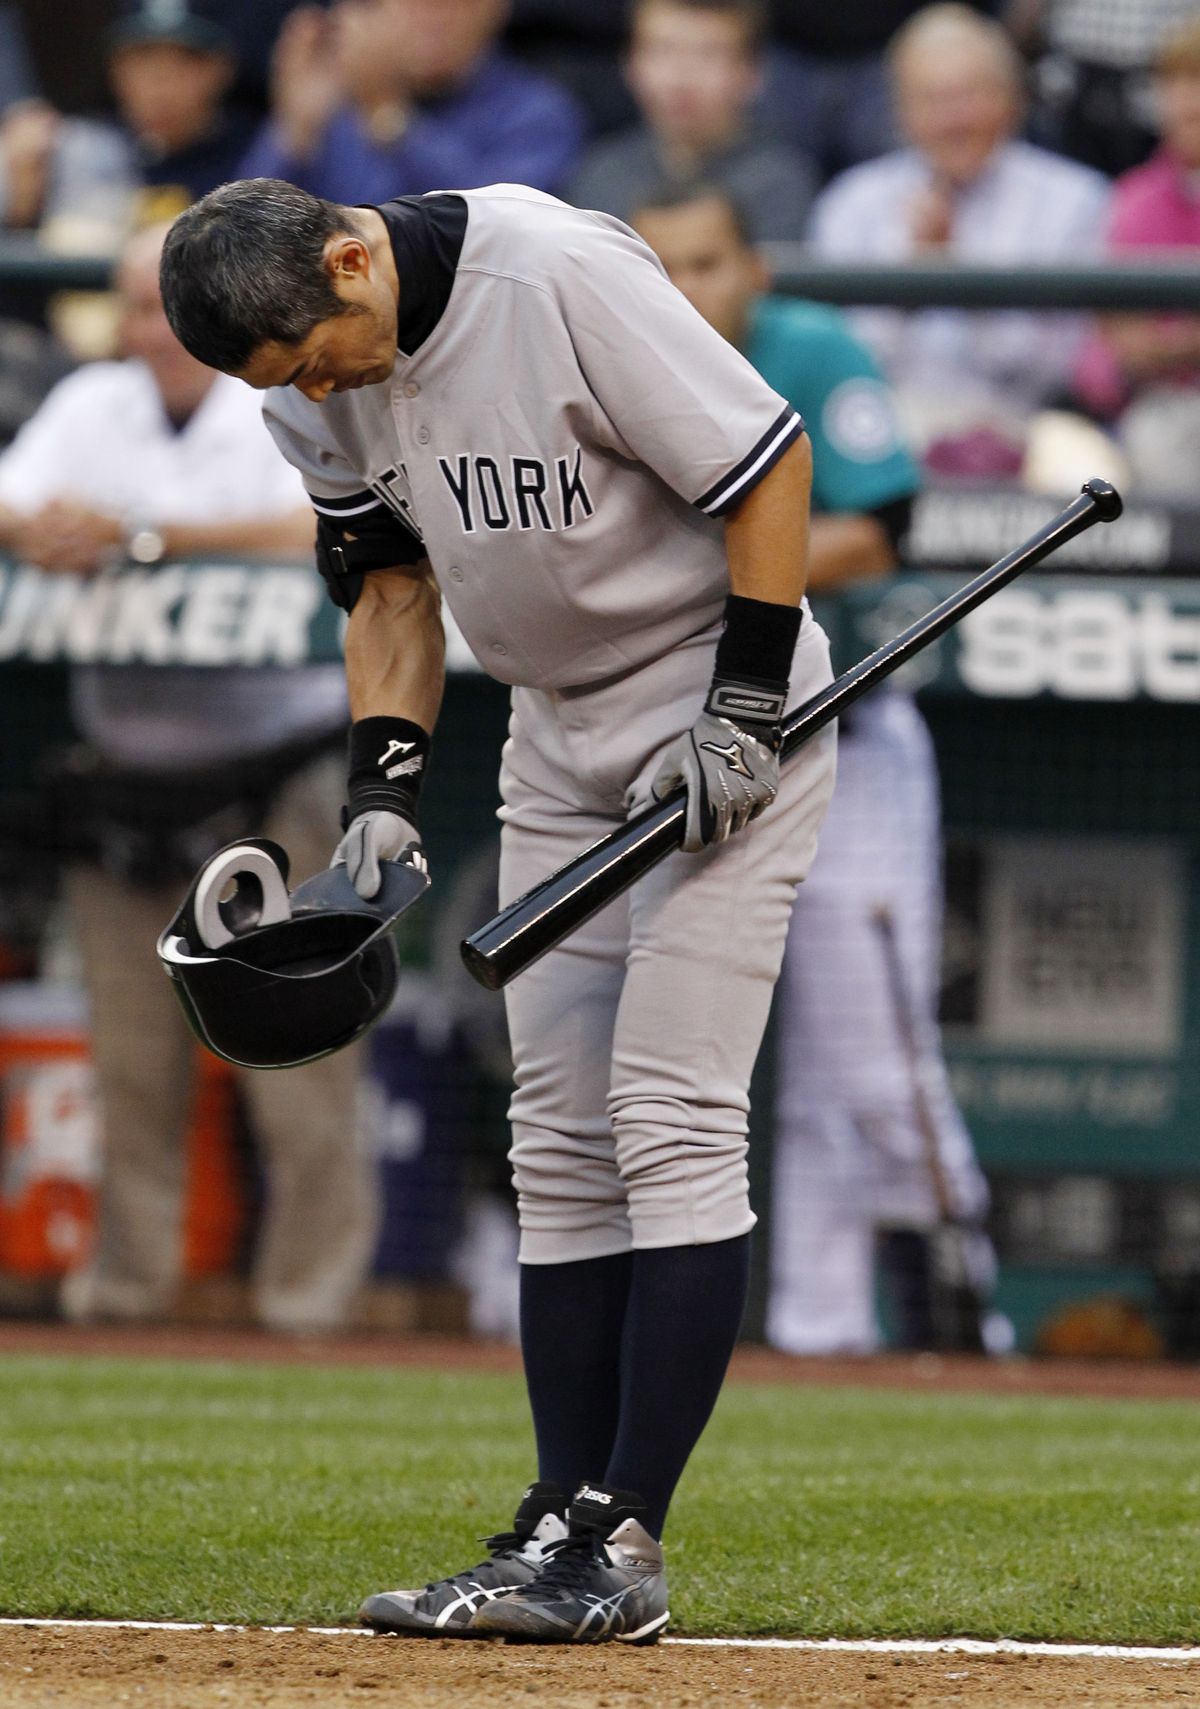 Ichiro Suzuki bows to Safeco Field fans before his first at-bat for the Yankees. (Associated Press)